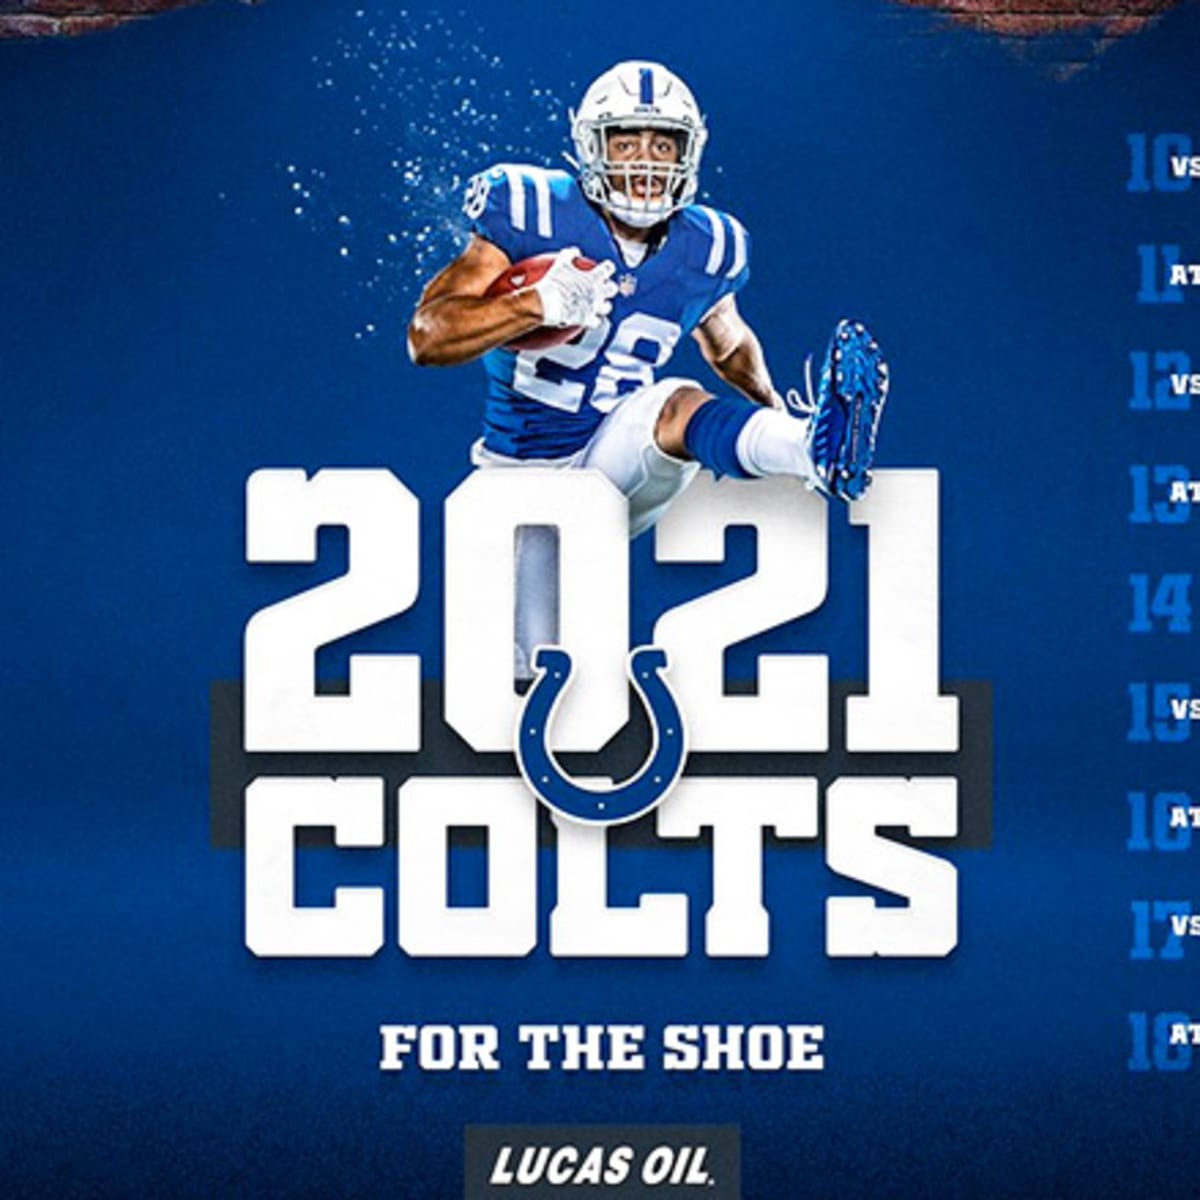 Indianapolis Colts 2022 Schedule Indianapolis Colts Schedule 2021 - Athlonsports.com | Expert Predictions,  Picks, And Previews